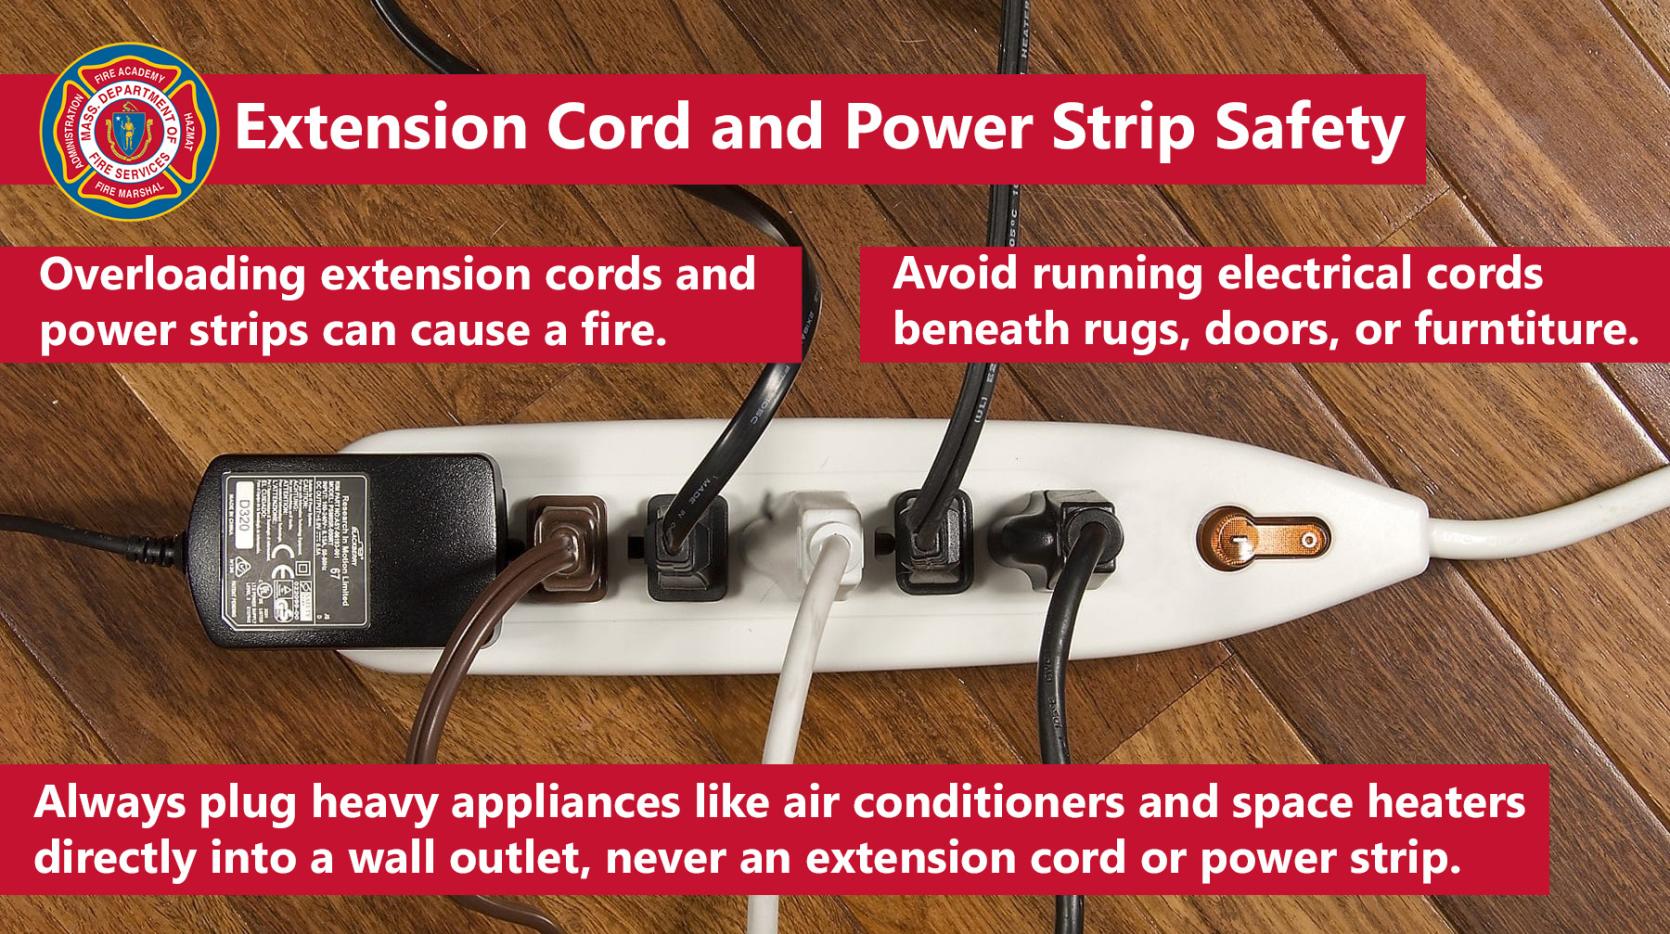 Extension Cord Dangers: Can I Safely Use One with a Space Heater?